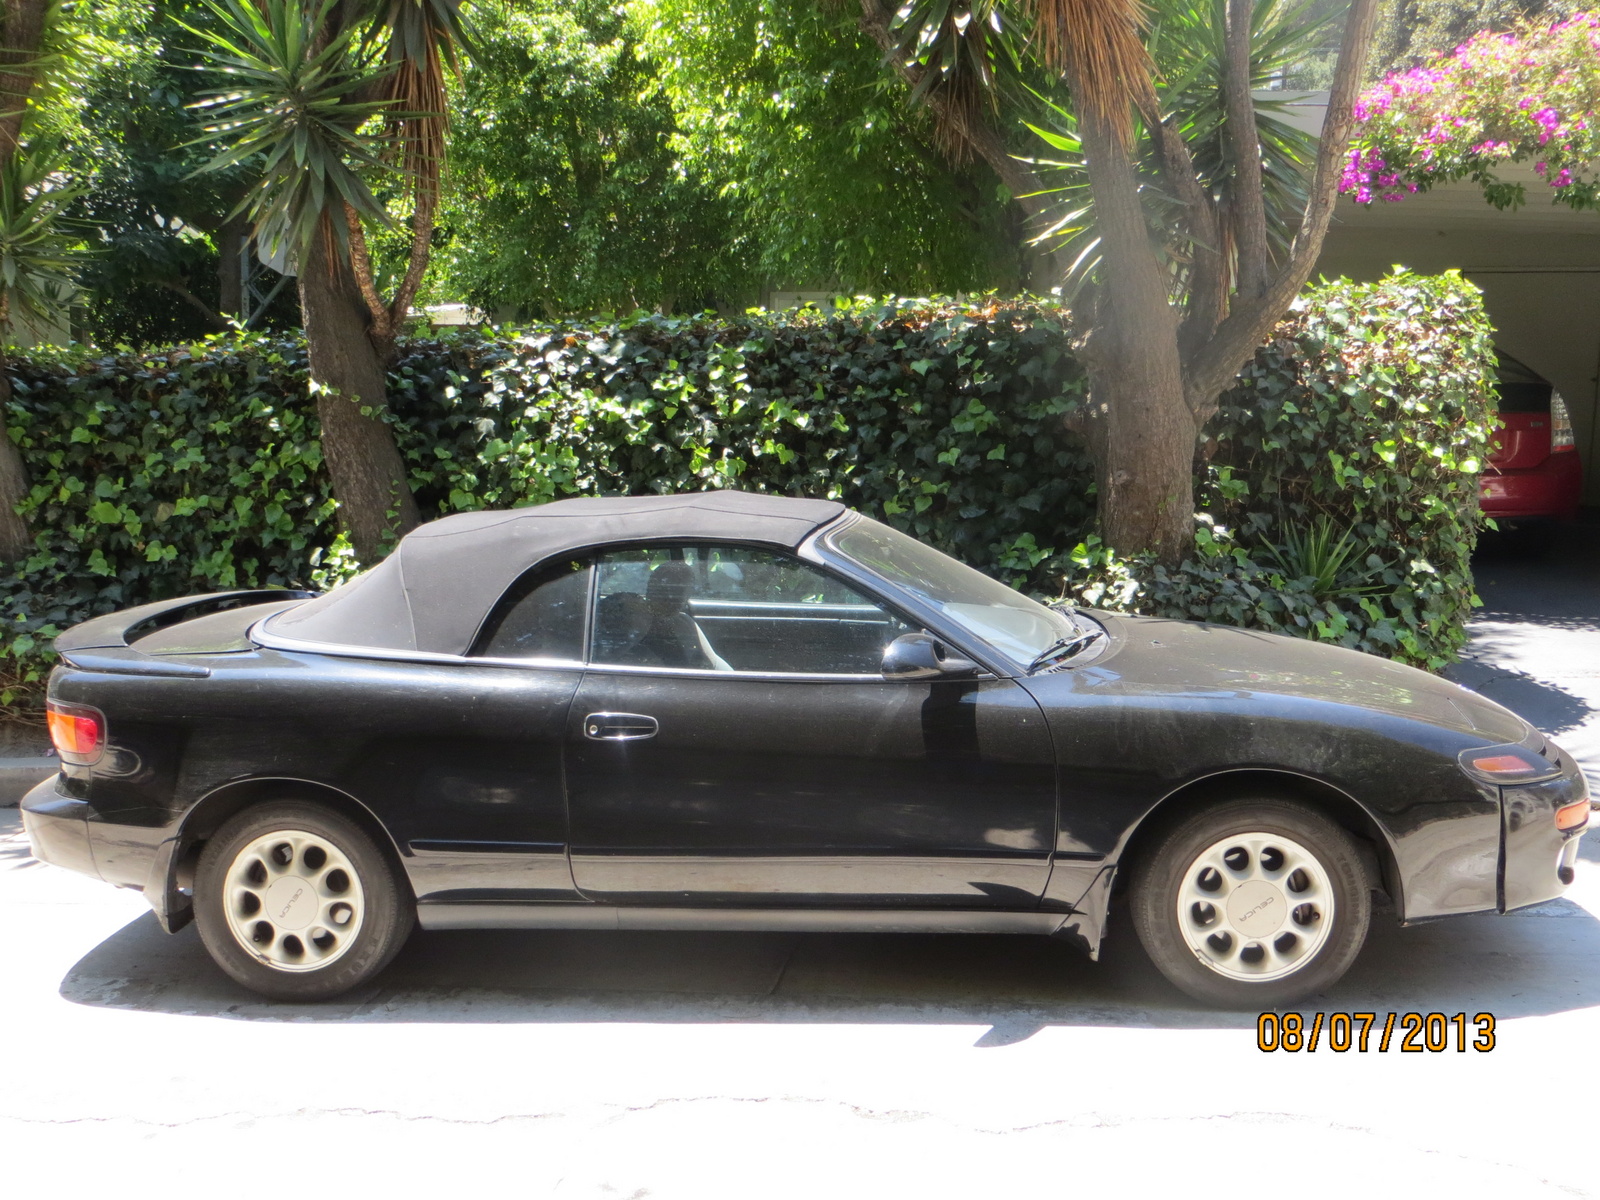 Used 1993 toyota celica gt convertible